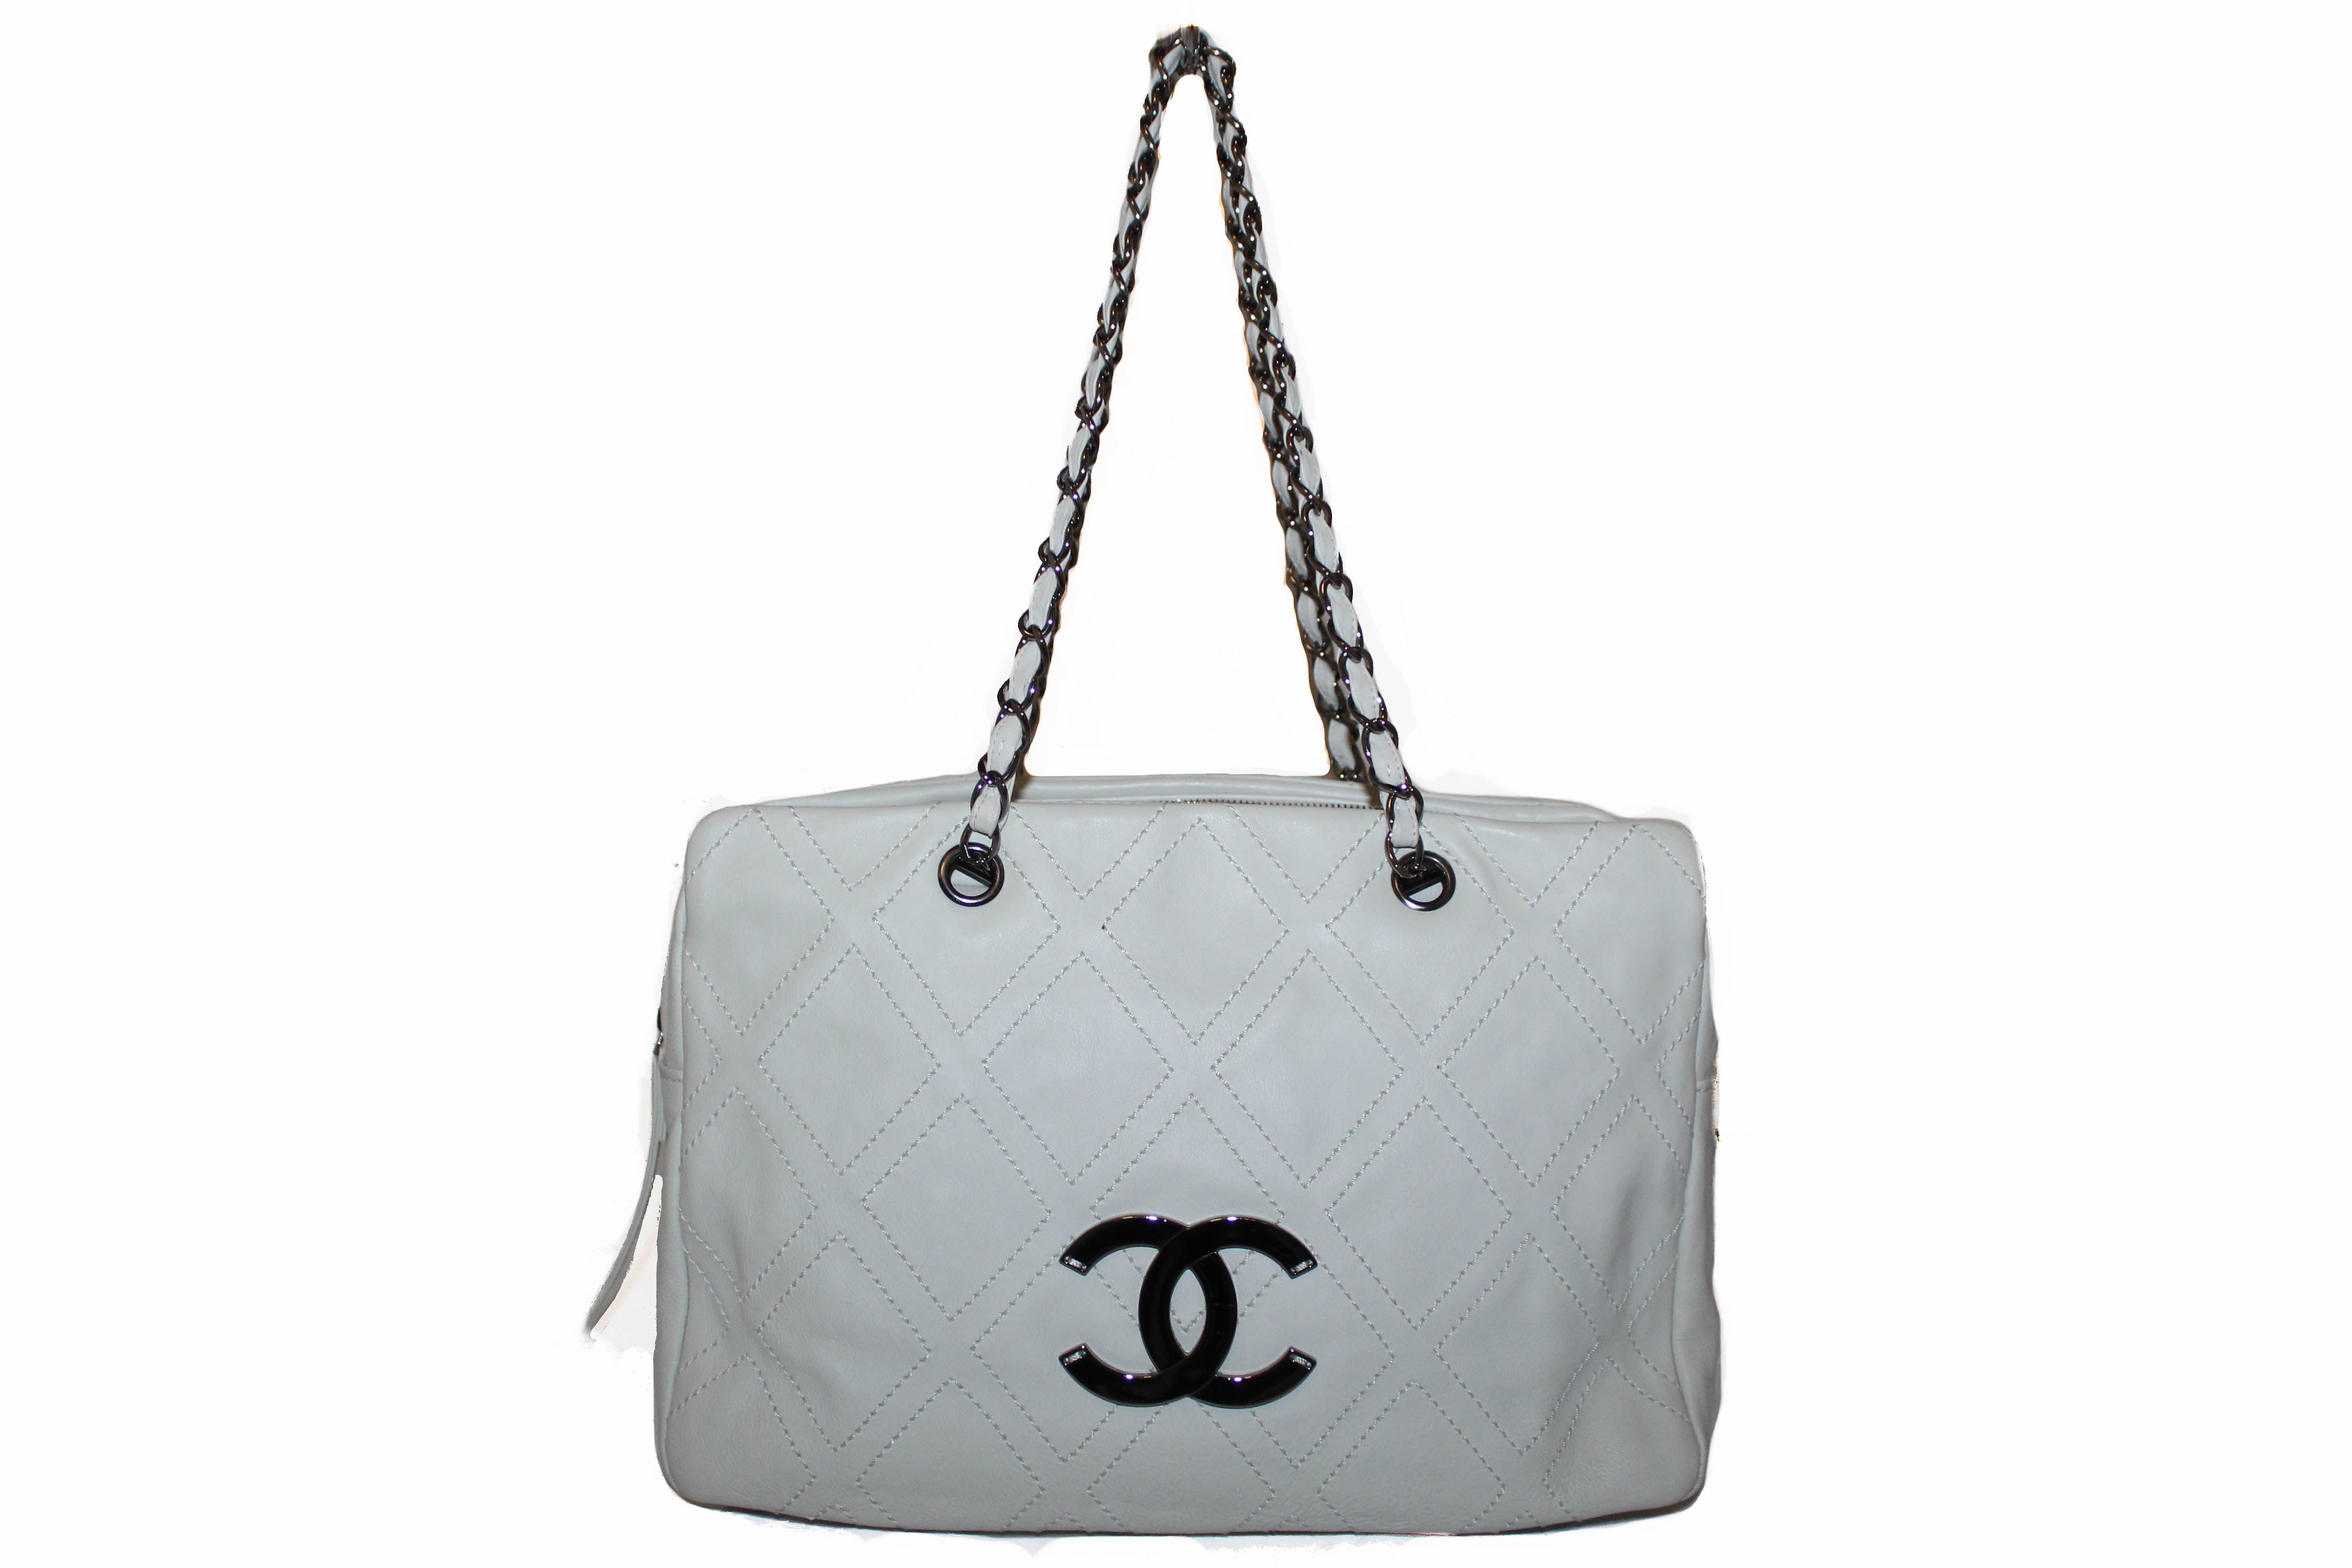 Authentic Chanel Off White Lambskin Leather Diamond Stitch Tote Bag